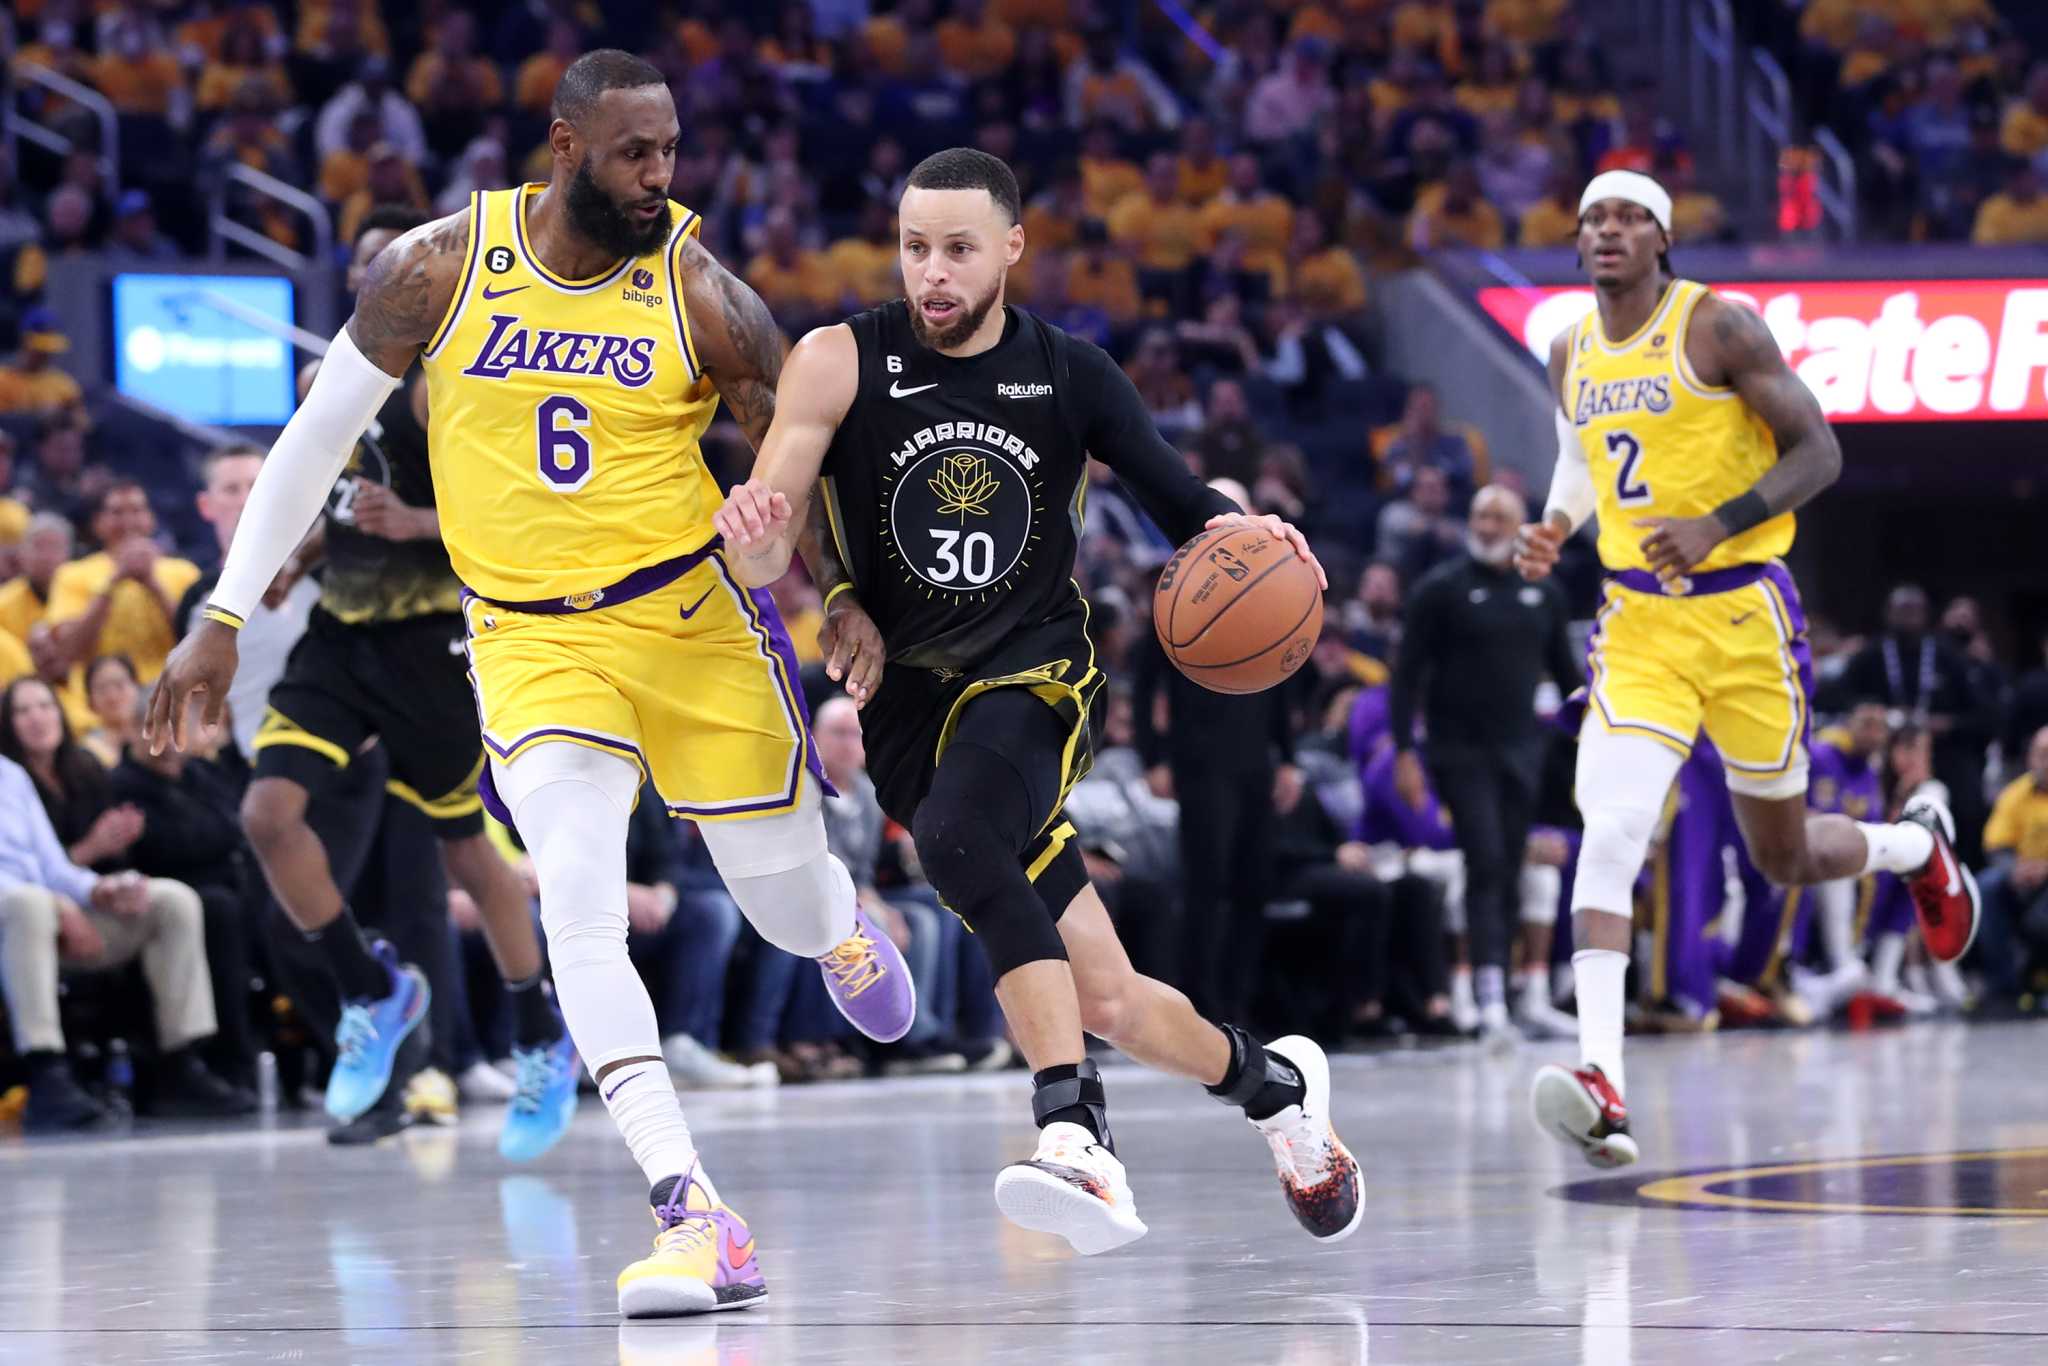 Report: LeBron James recruiting Steph Curry for 2024 Olympics in Paris